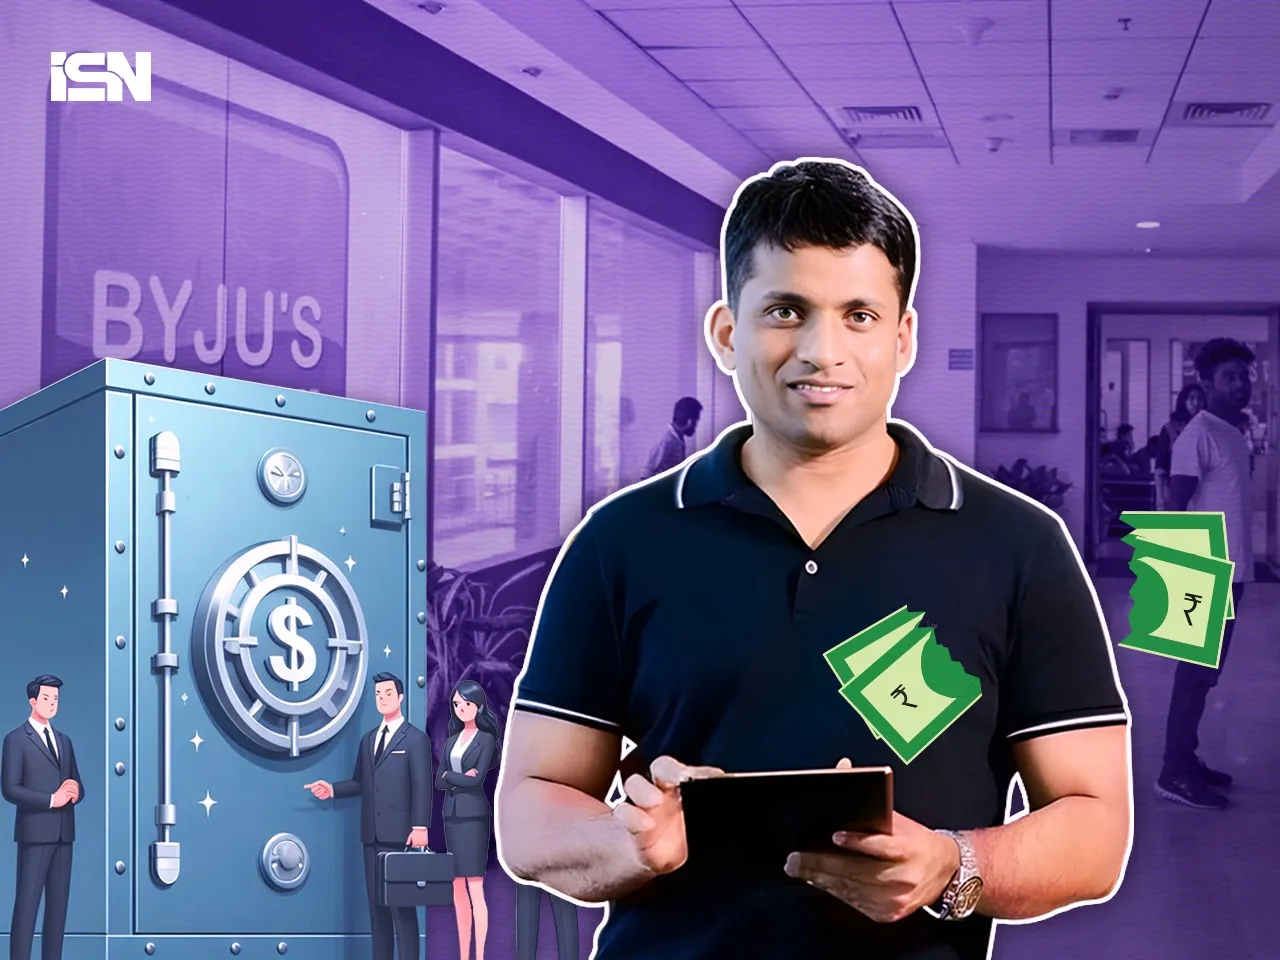 Byju's says it has paid part salaries for February, will pay rest from rights issue fund